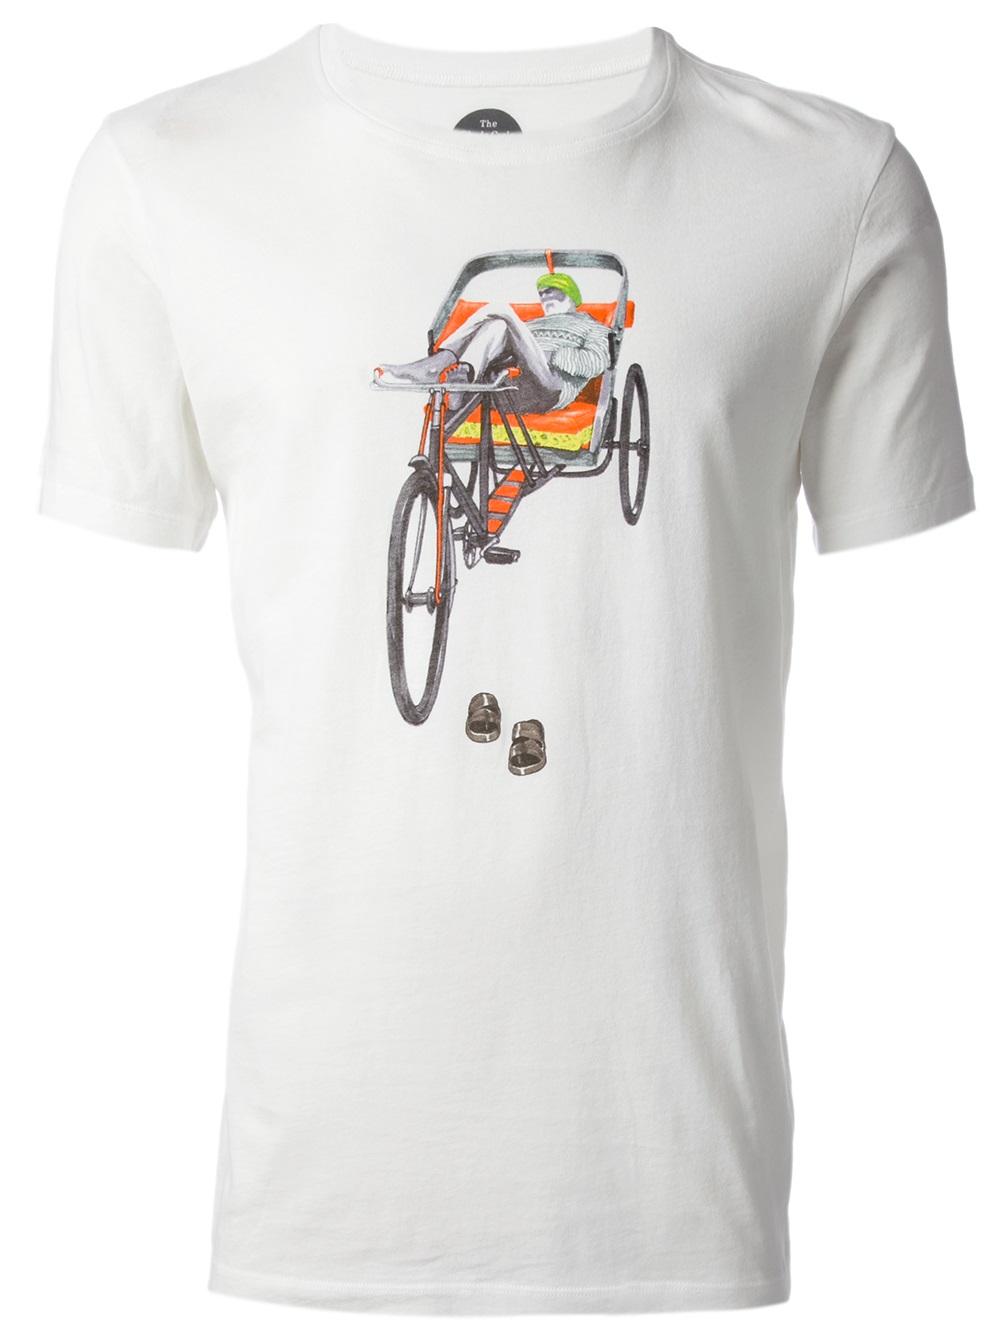 Paul Smith Paul Smith Jeans Graphic Print T-shirt in White for Men - Lyst